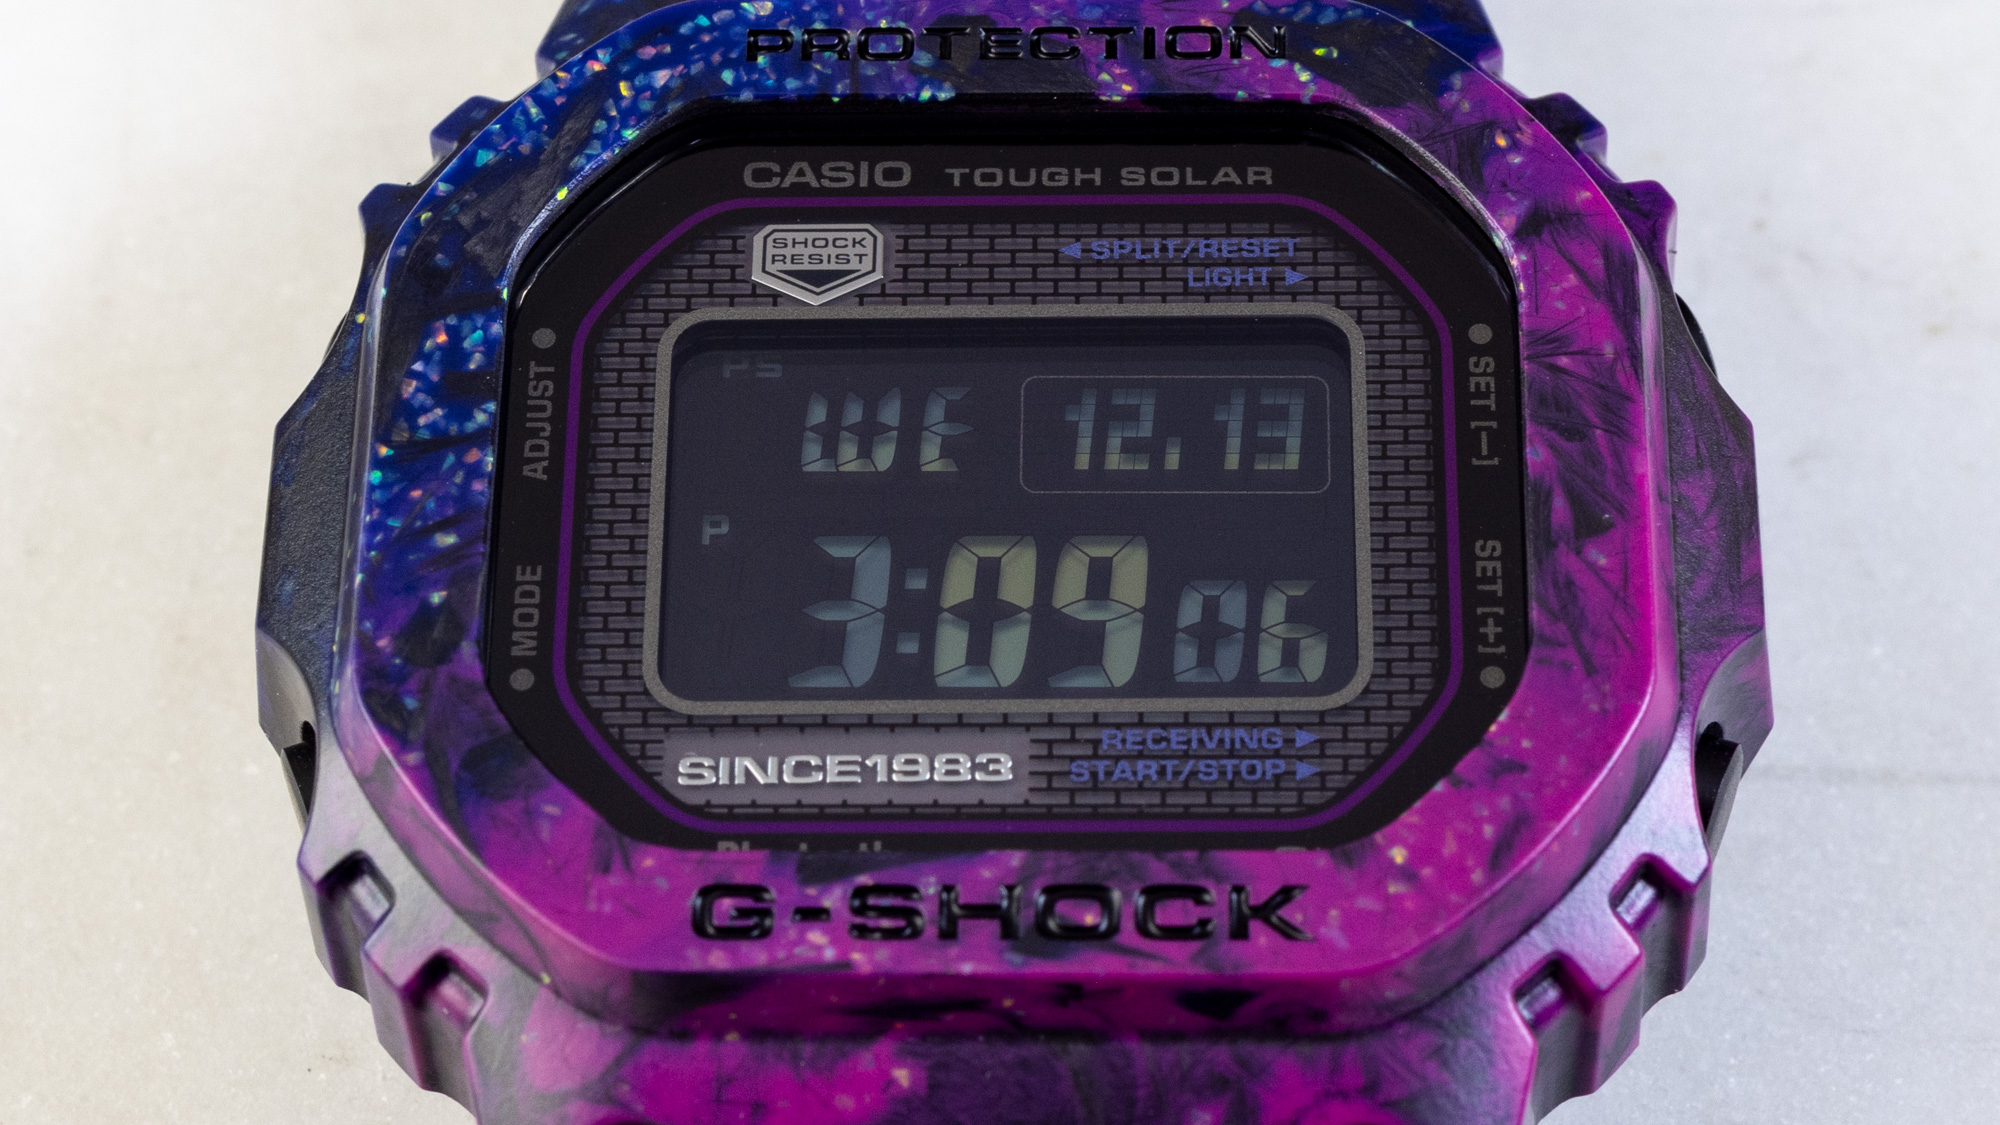 G-Shock Goes Lightweight with the Carbon Edition